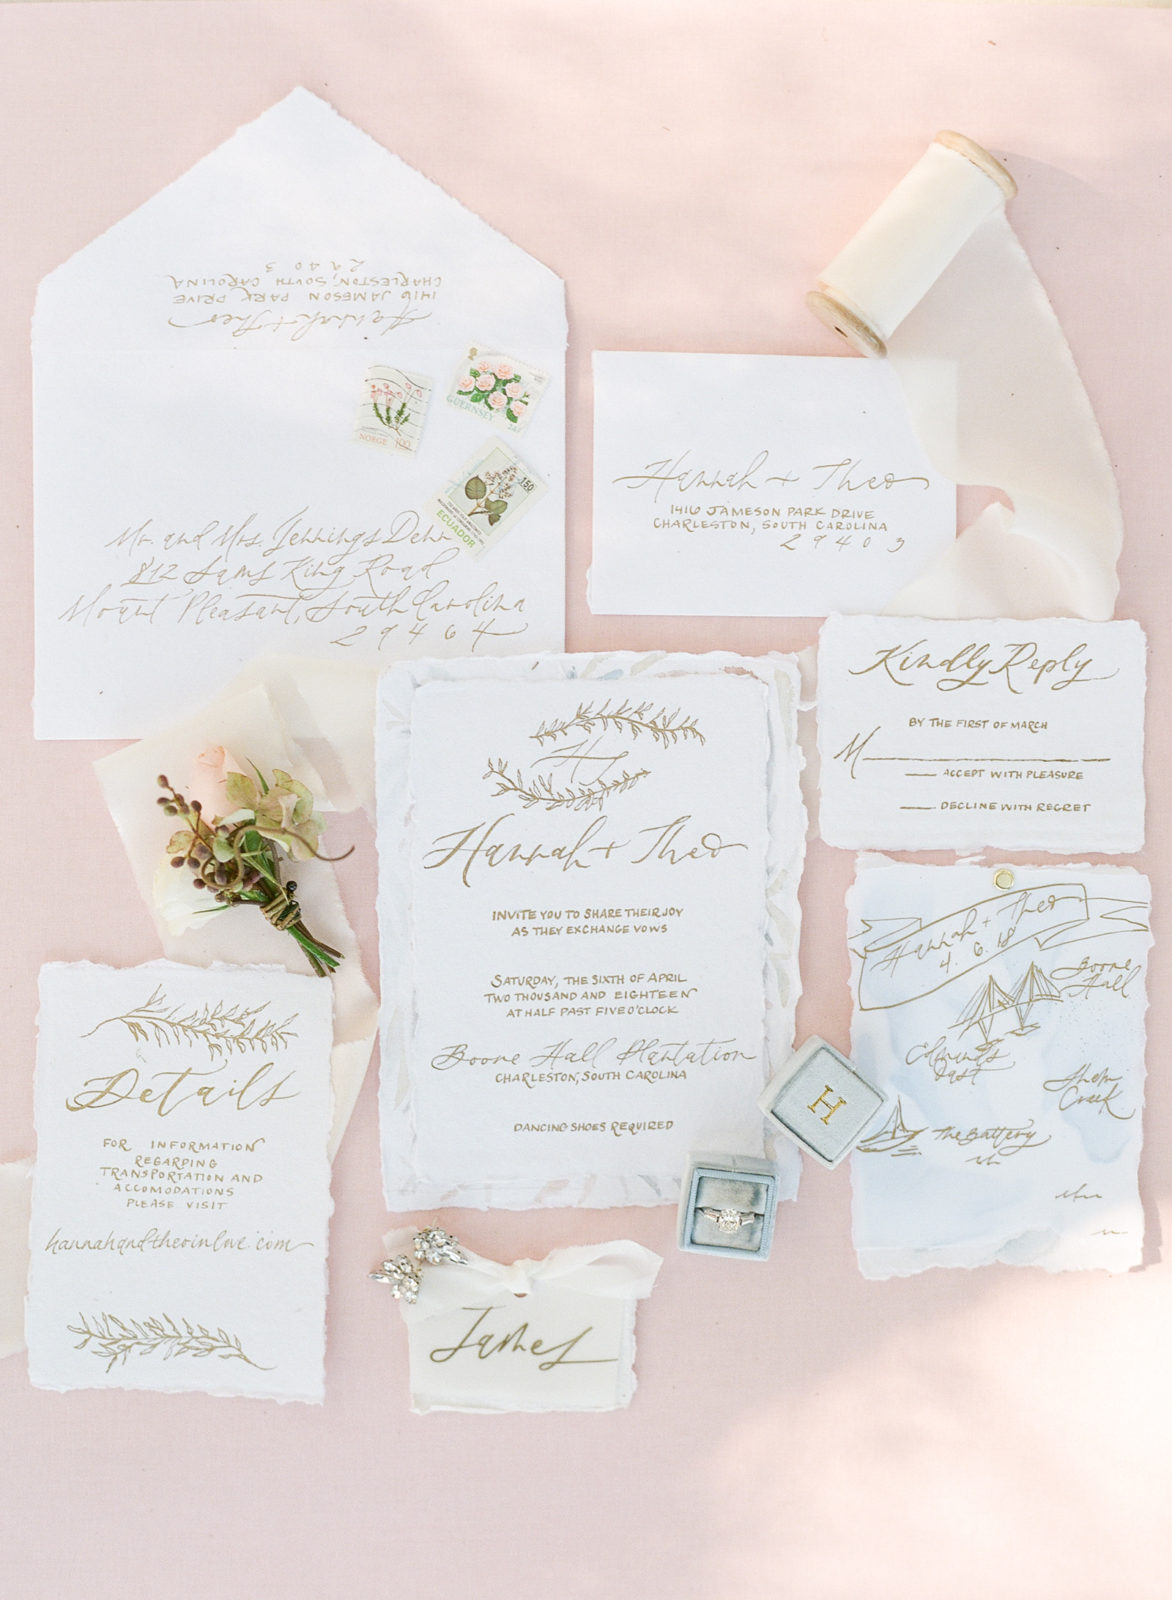 Best Wedding Invitations of 2018 | Fine Art Calligraphy | Wedding Invitation Inspiration | Handmade Wedding Invitations | Molly Carr Photography | Boone Hall Plantation Wedding Invitations